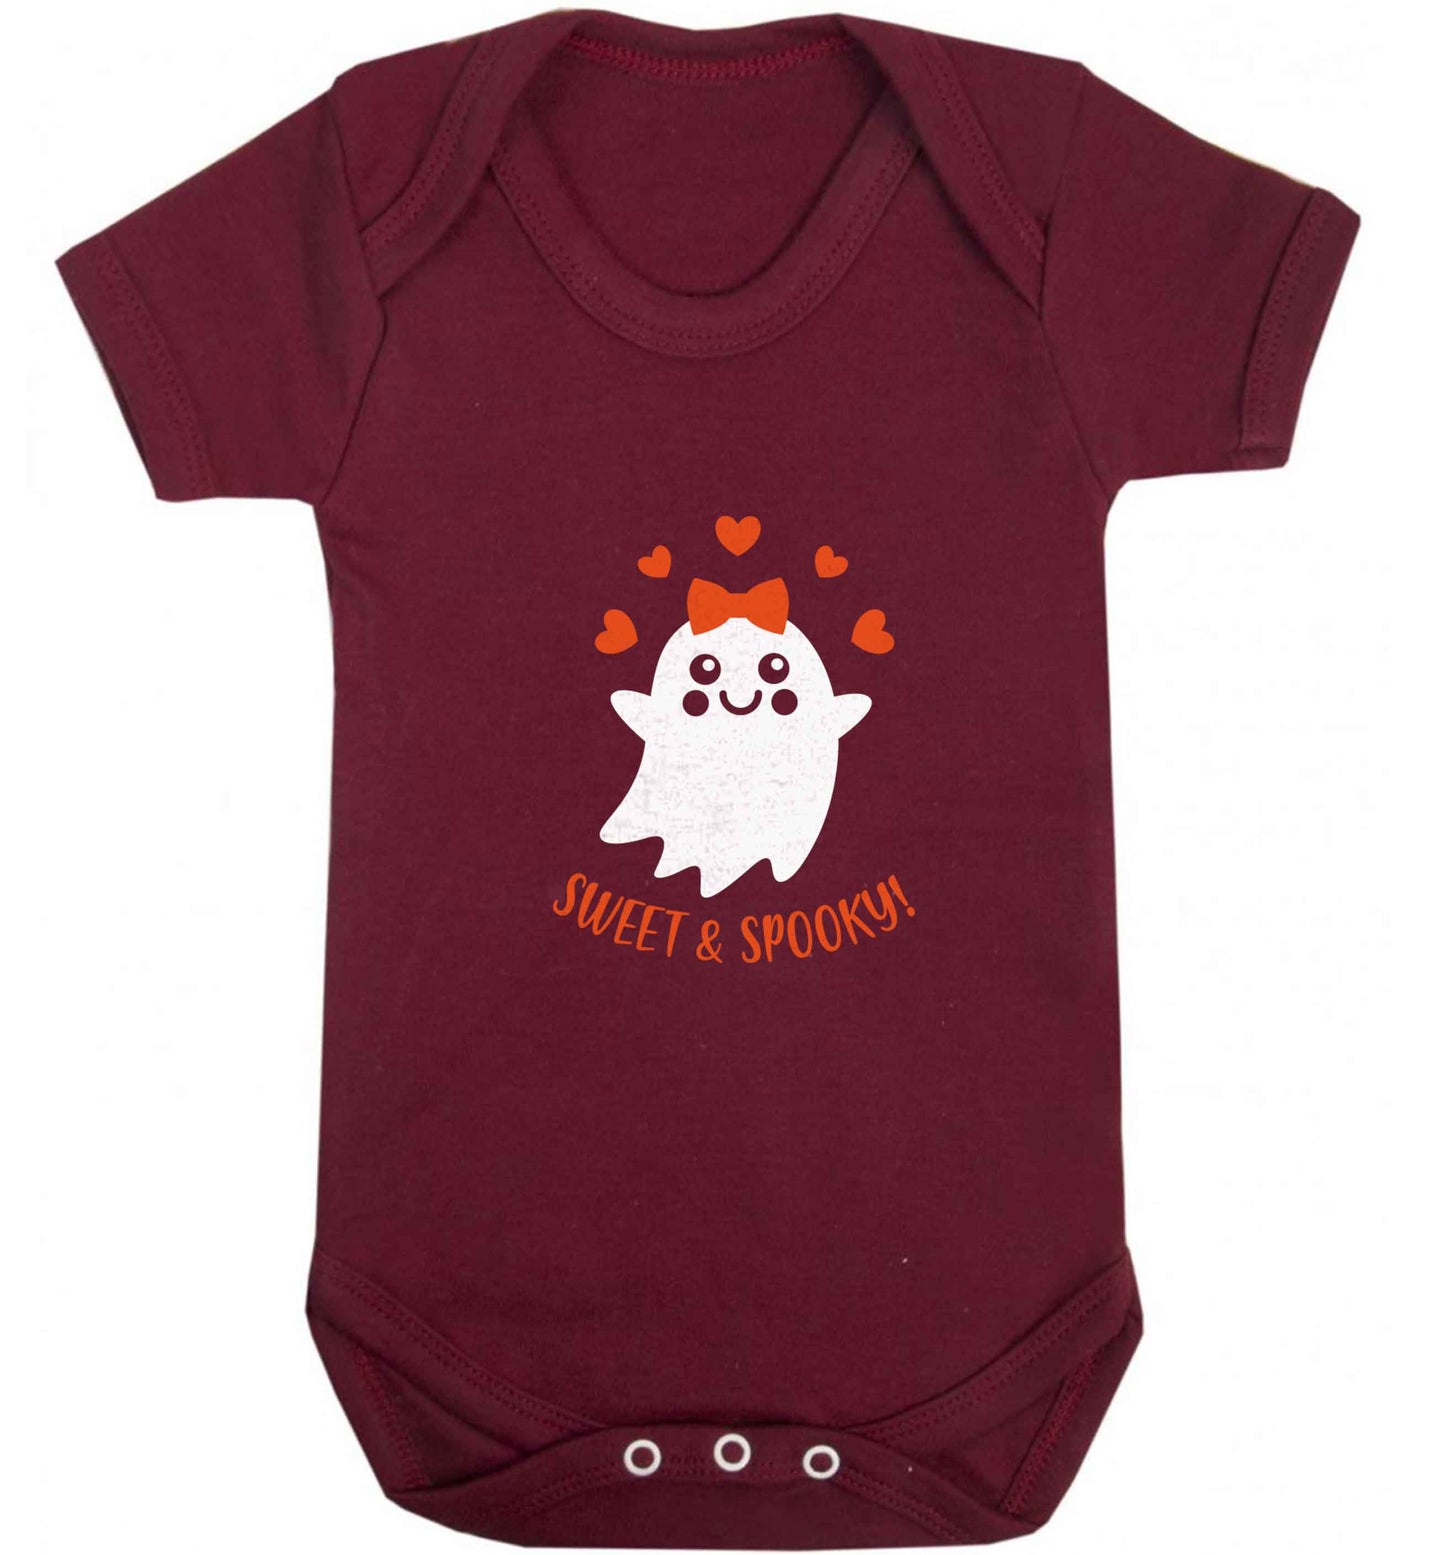 Sweet and spooky baby vest maroon 18-24 months